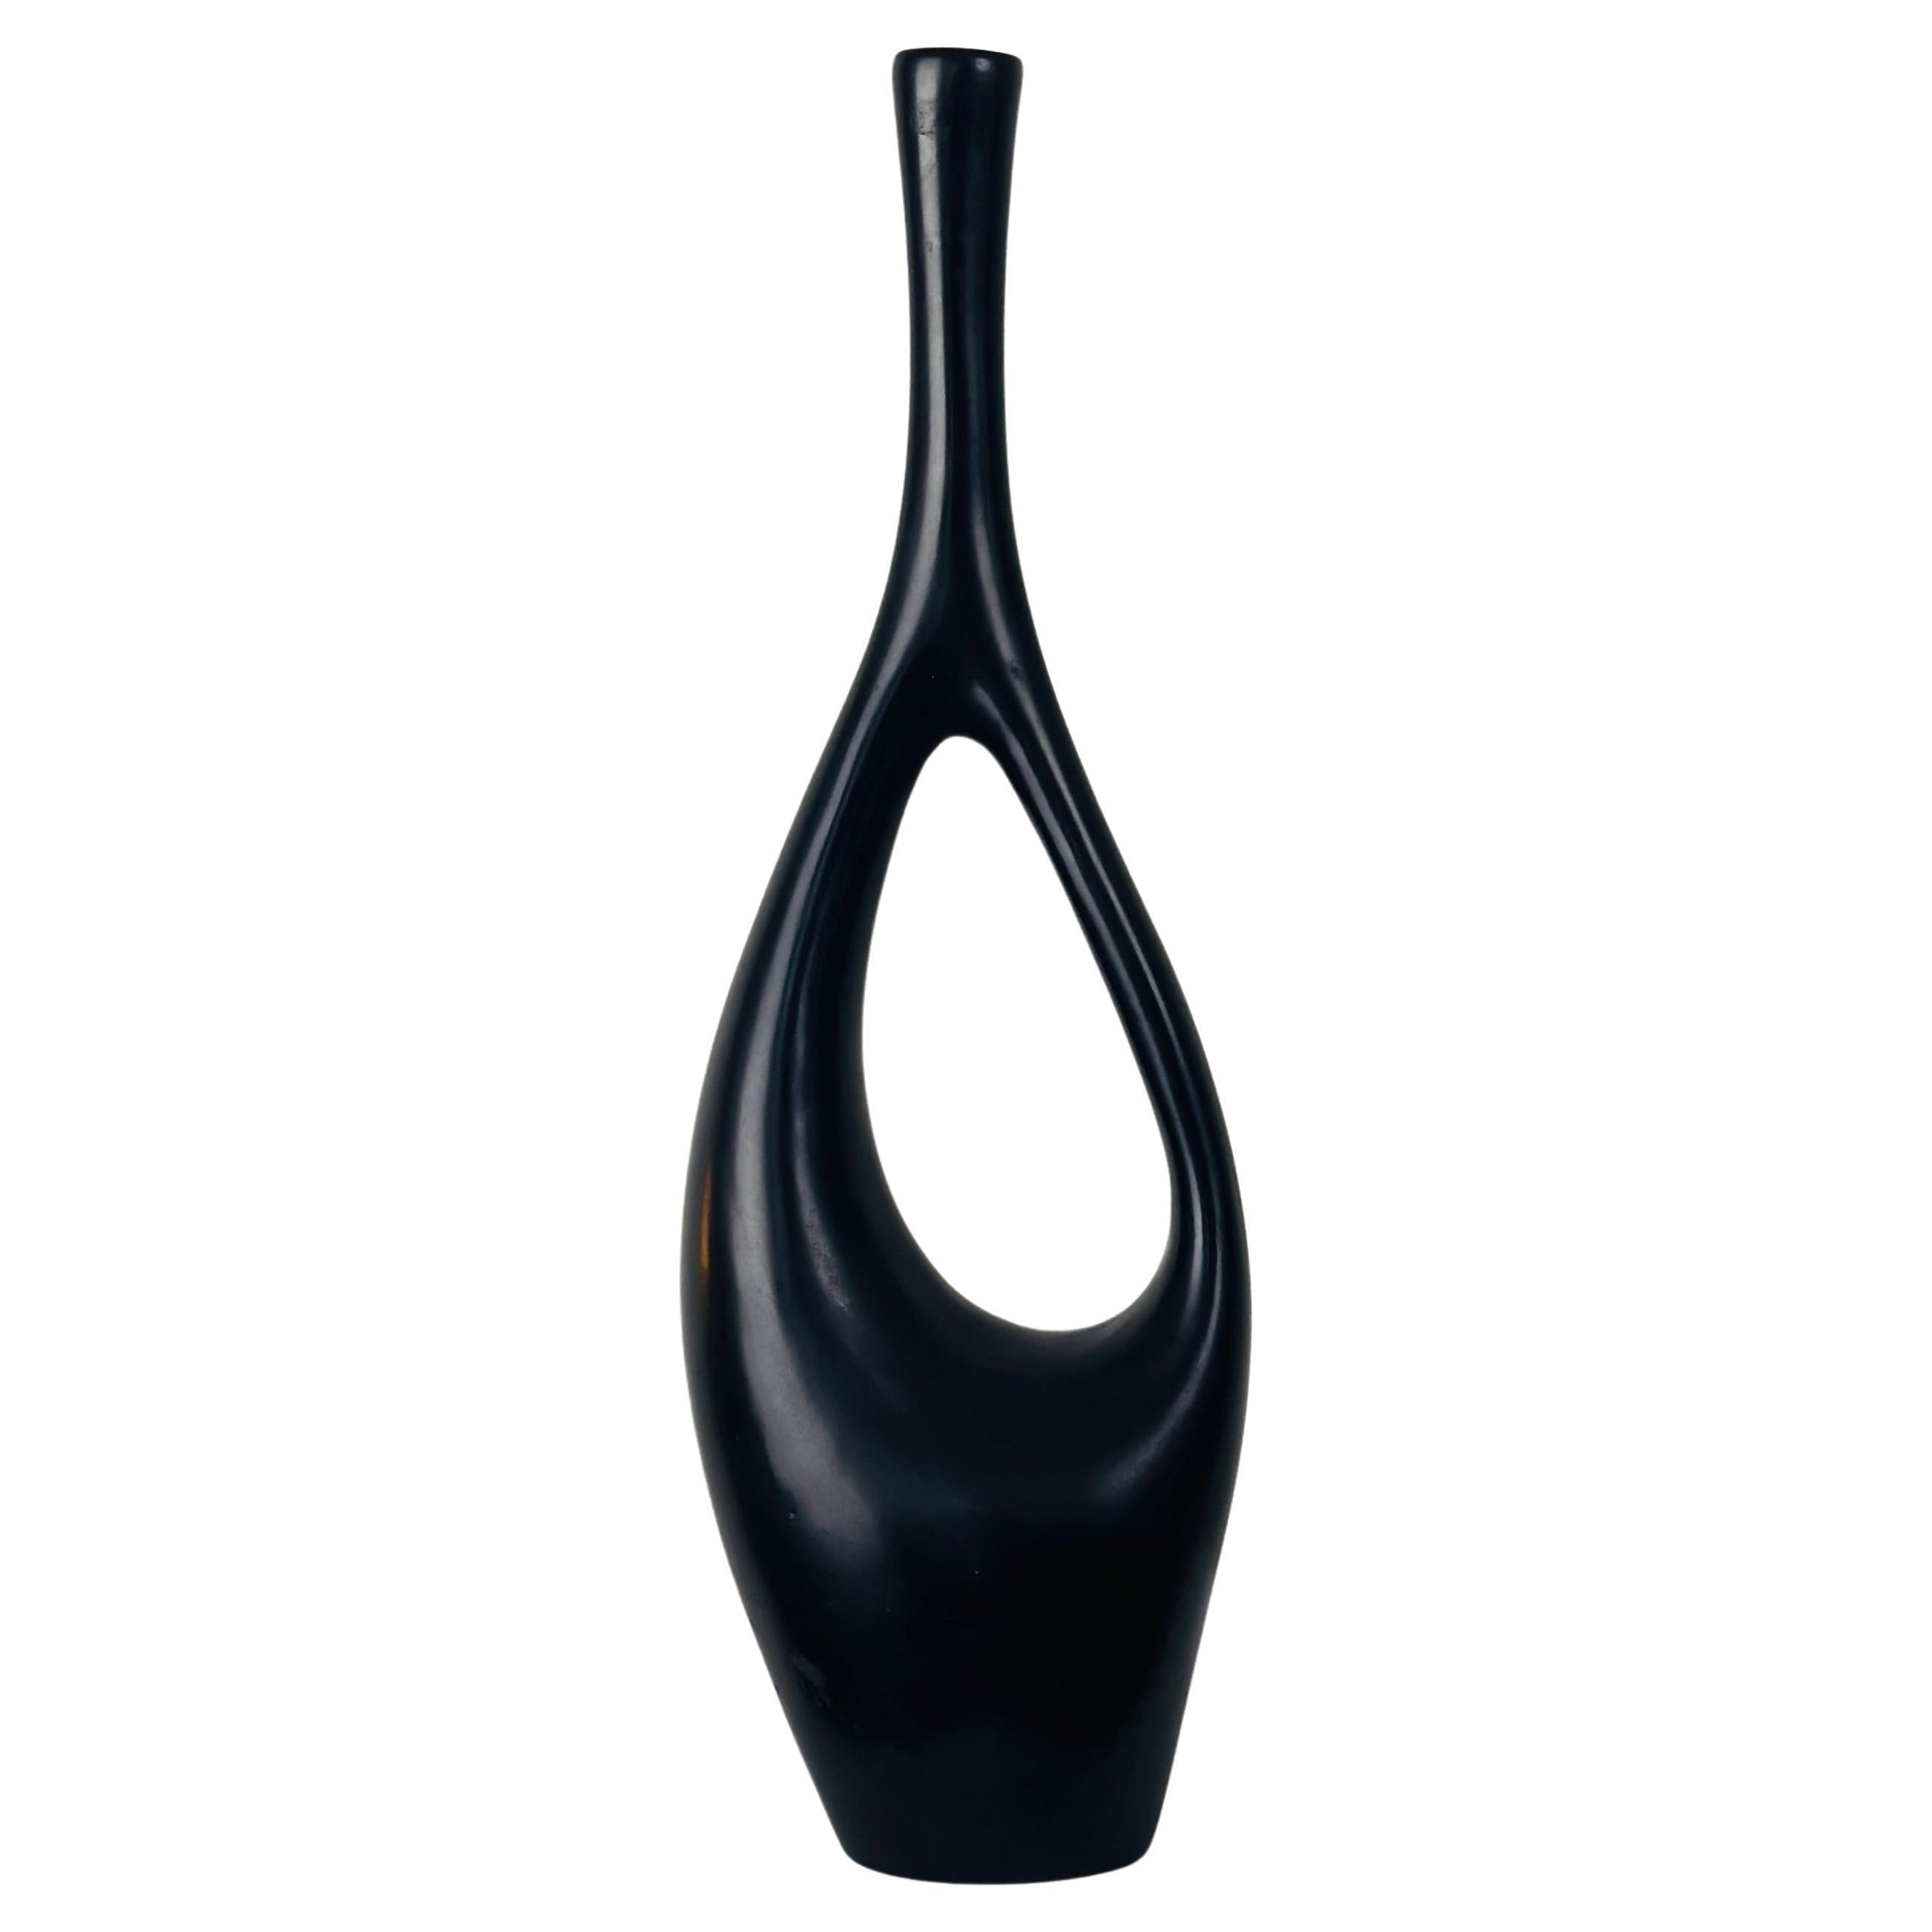 Large soliflore vase with black ceramic handle by Jean André Doucin, circa 1950.
Height 42cm
Very elegant
Incised signature on the bottom
Perfect condition